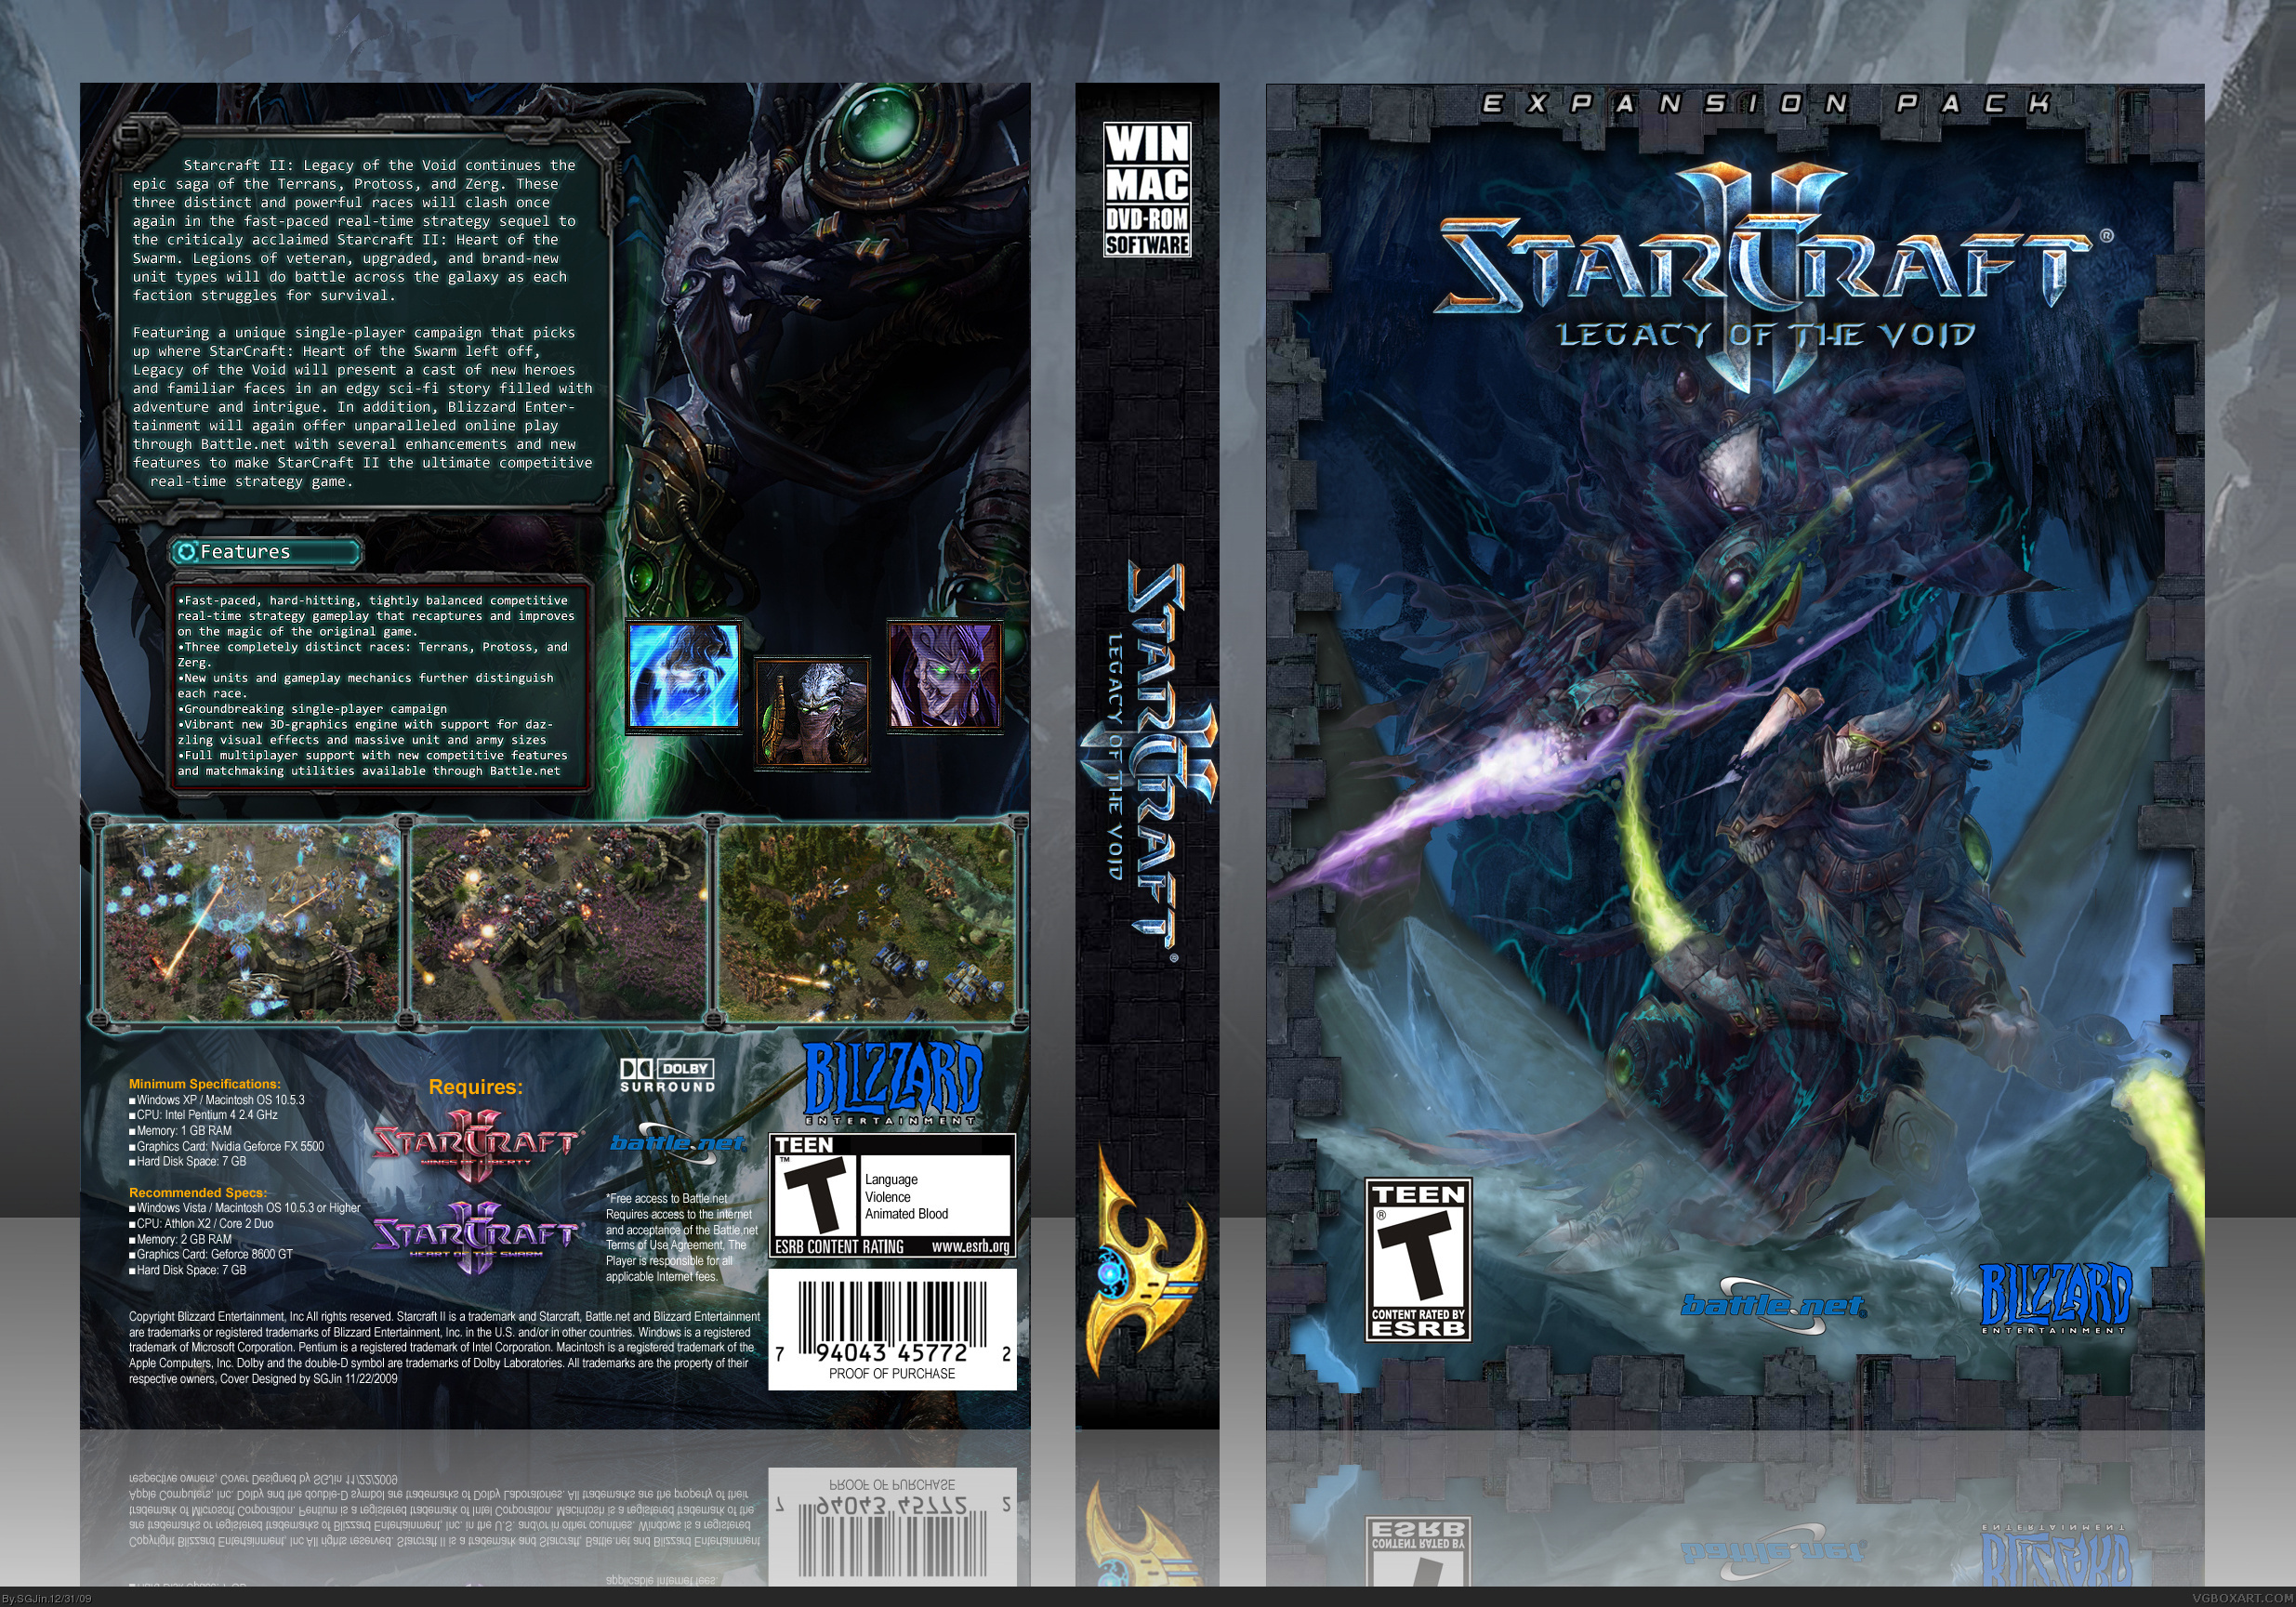 Starcraft II: Legacy of the Void box cover